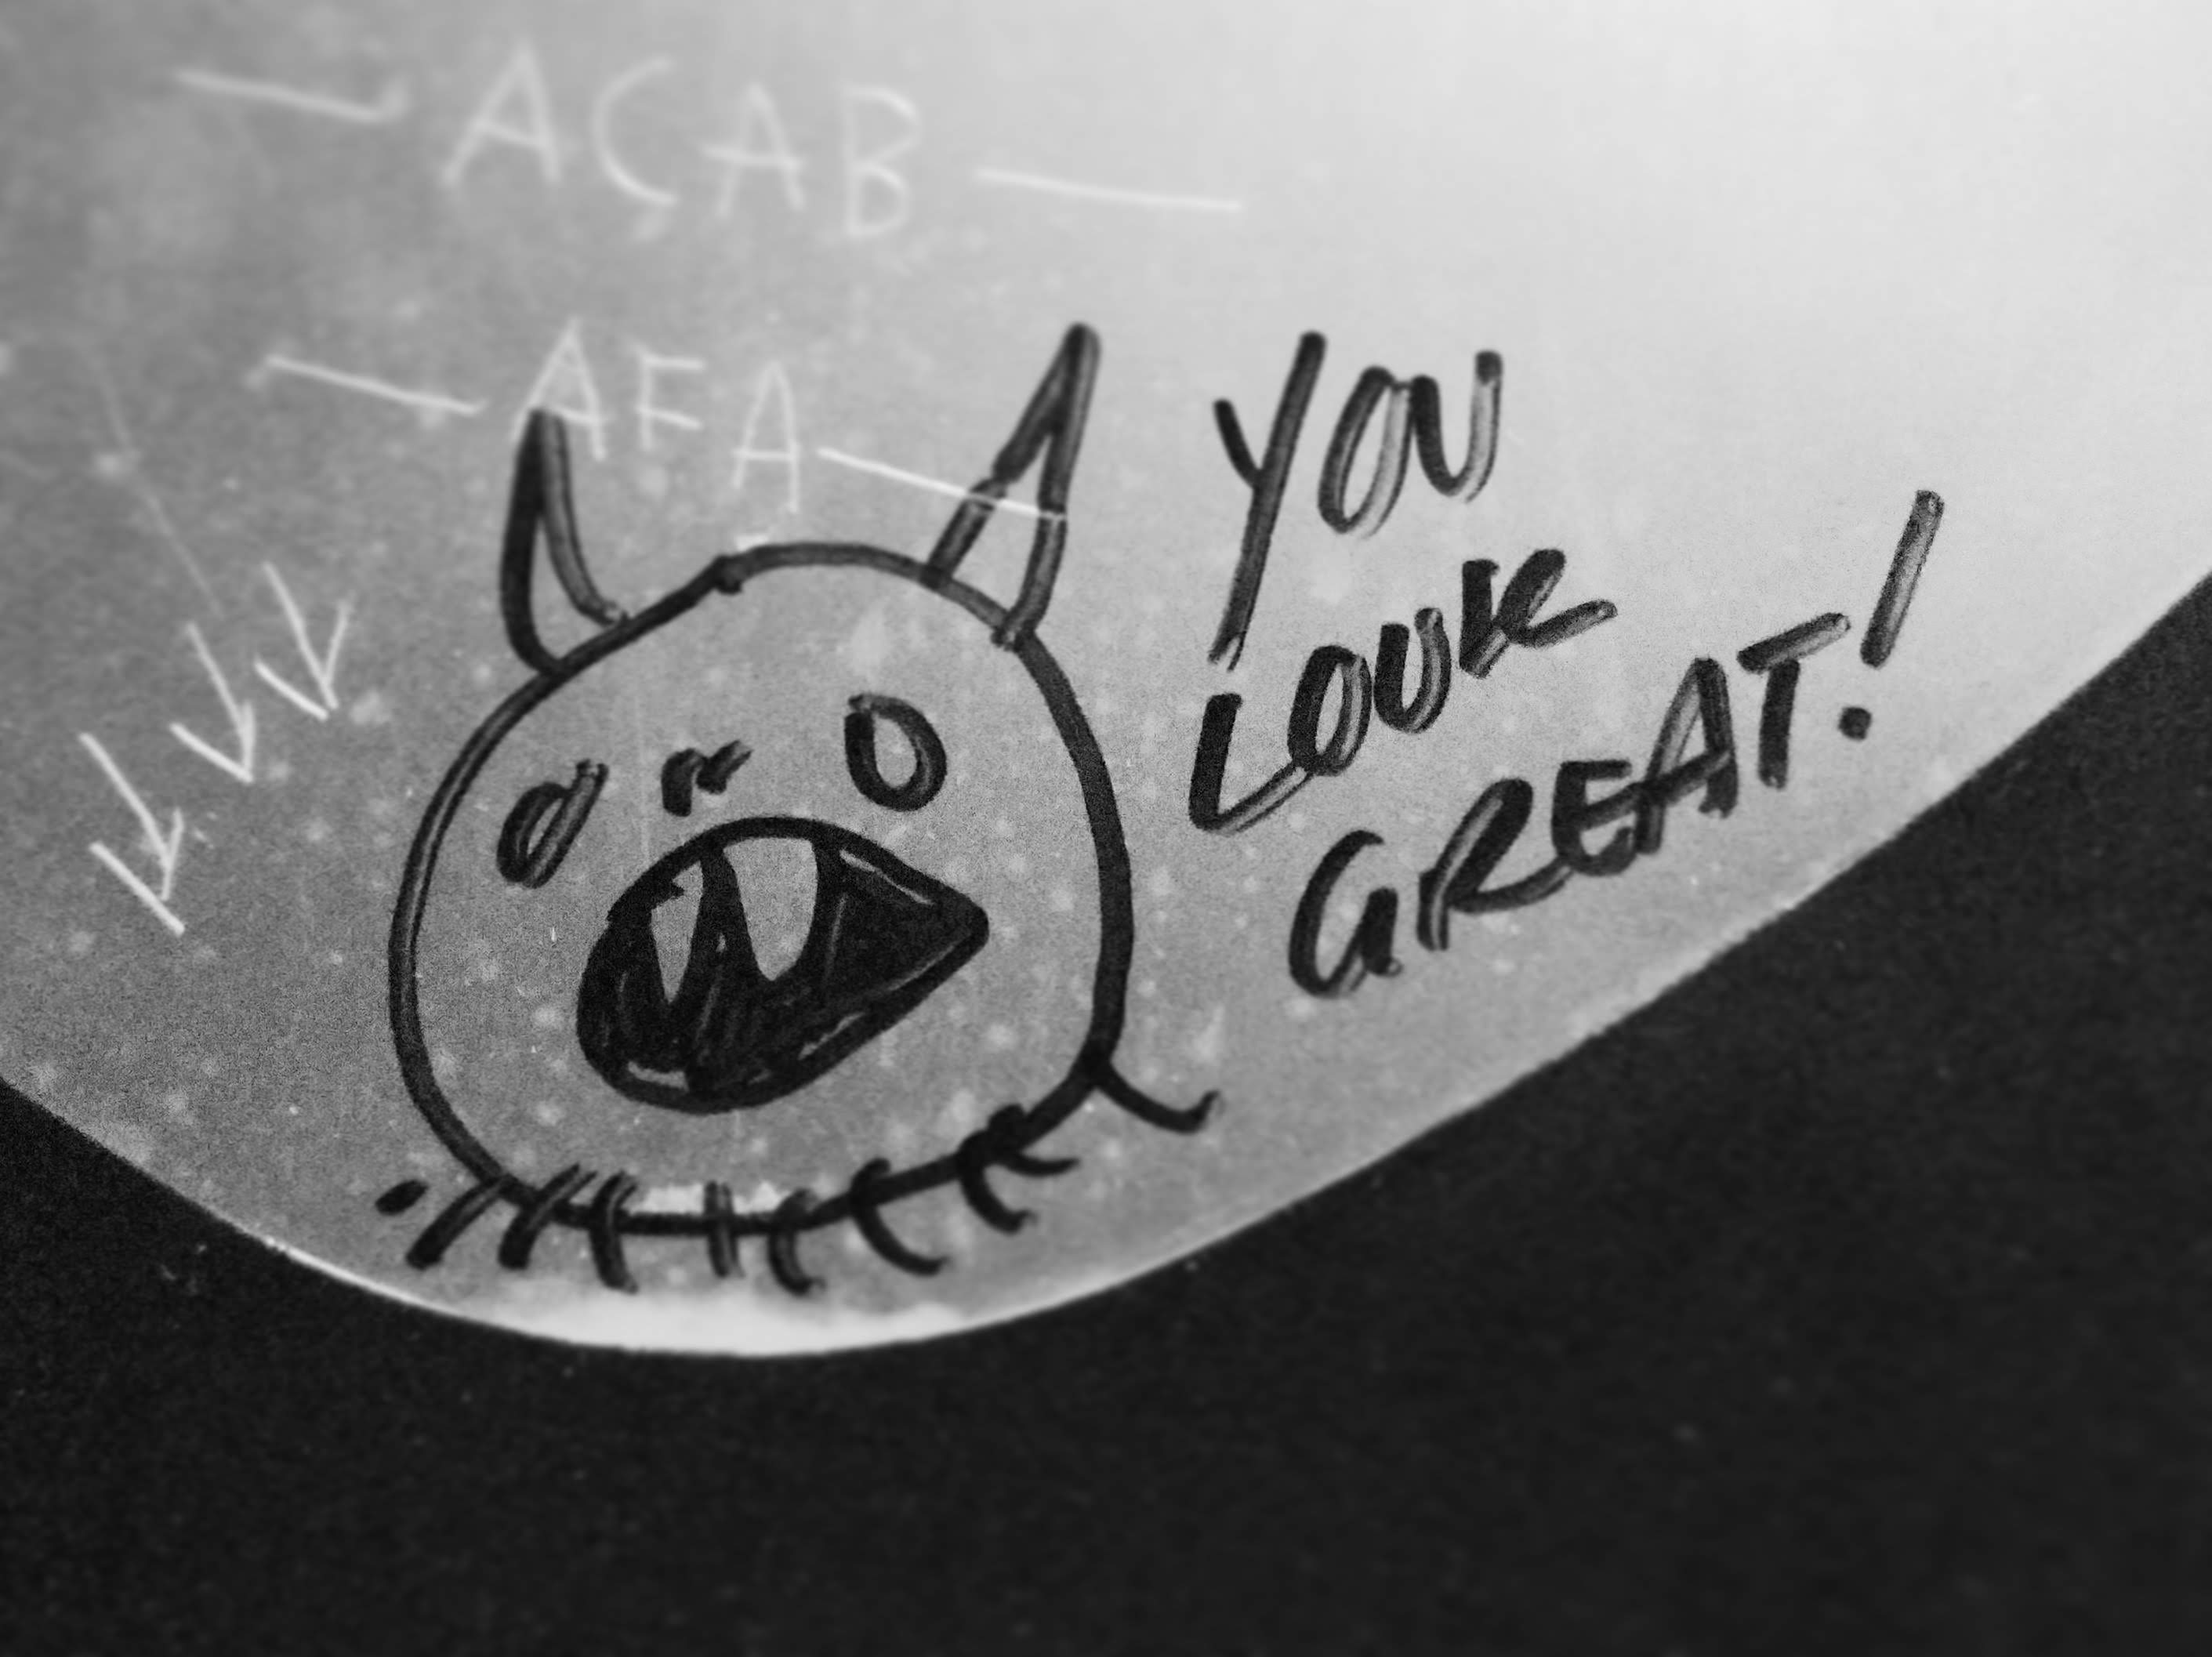 Graffiti in a bathroom stall: a monster next to text in all caps that says "You look great!"